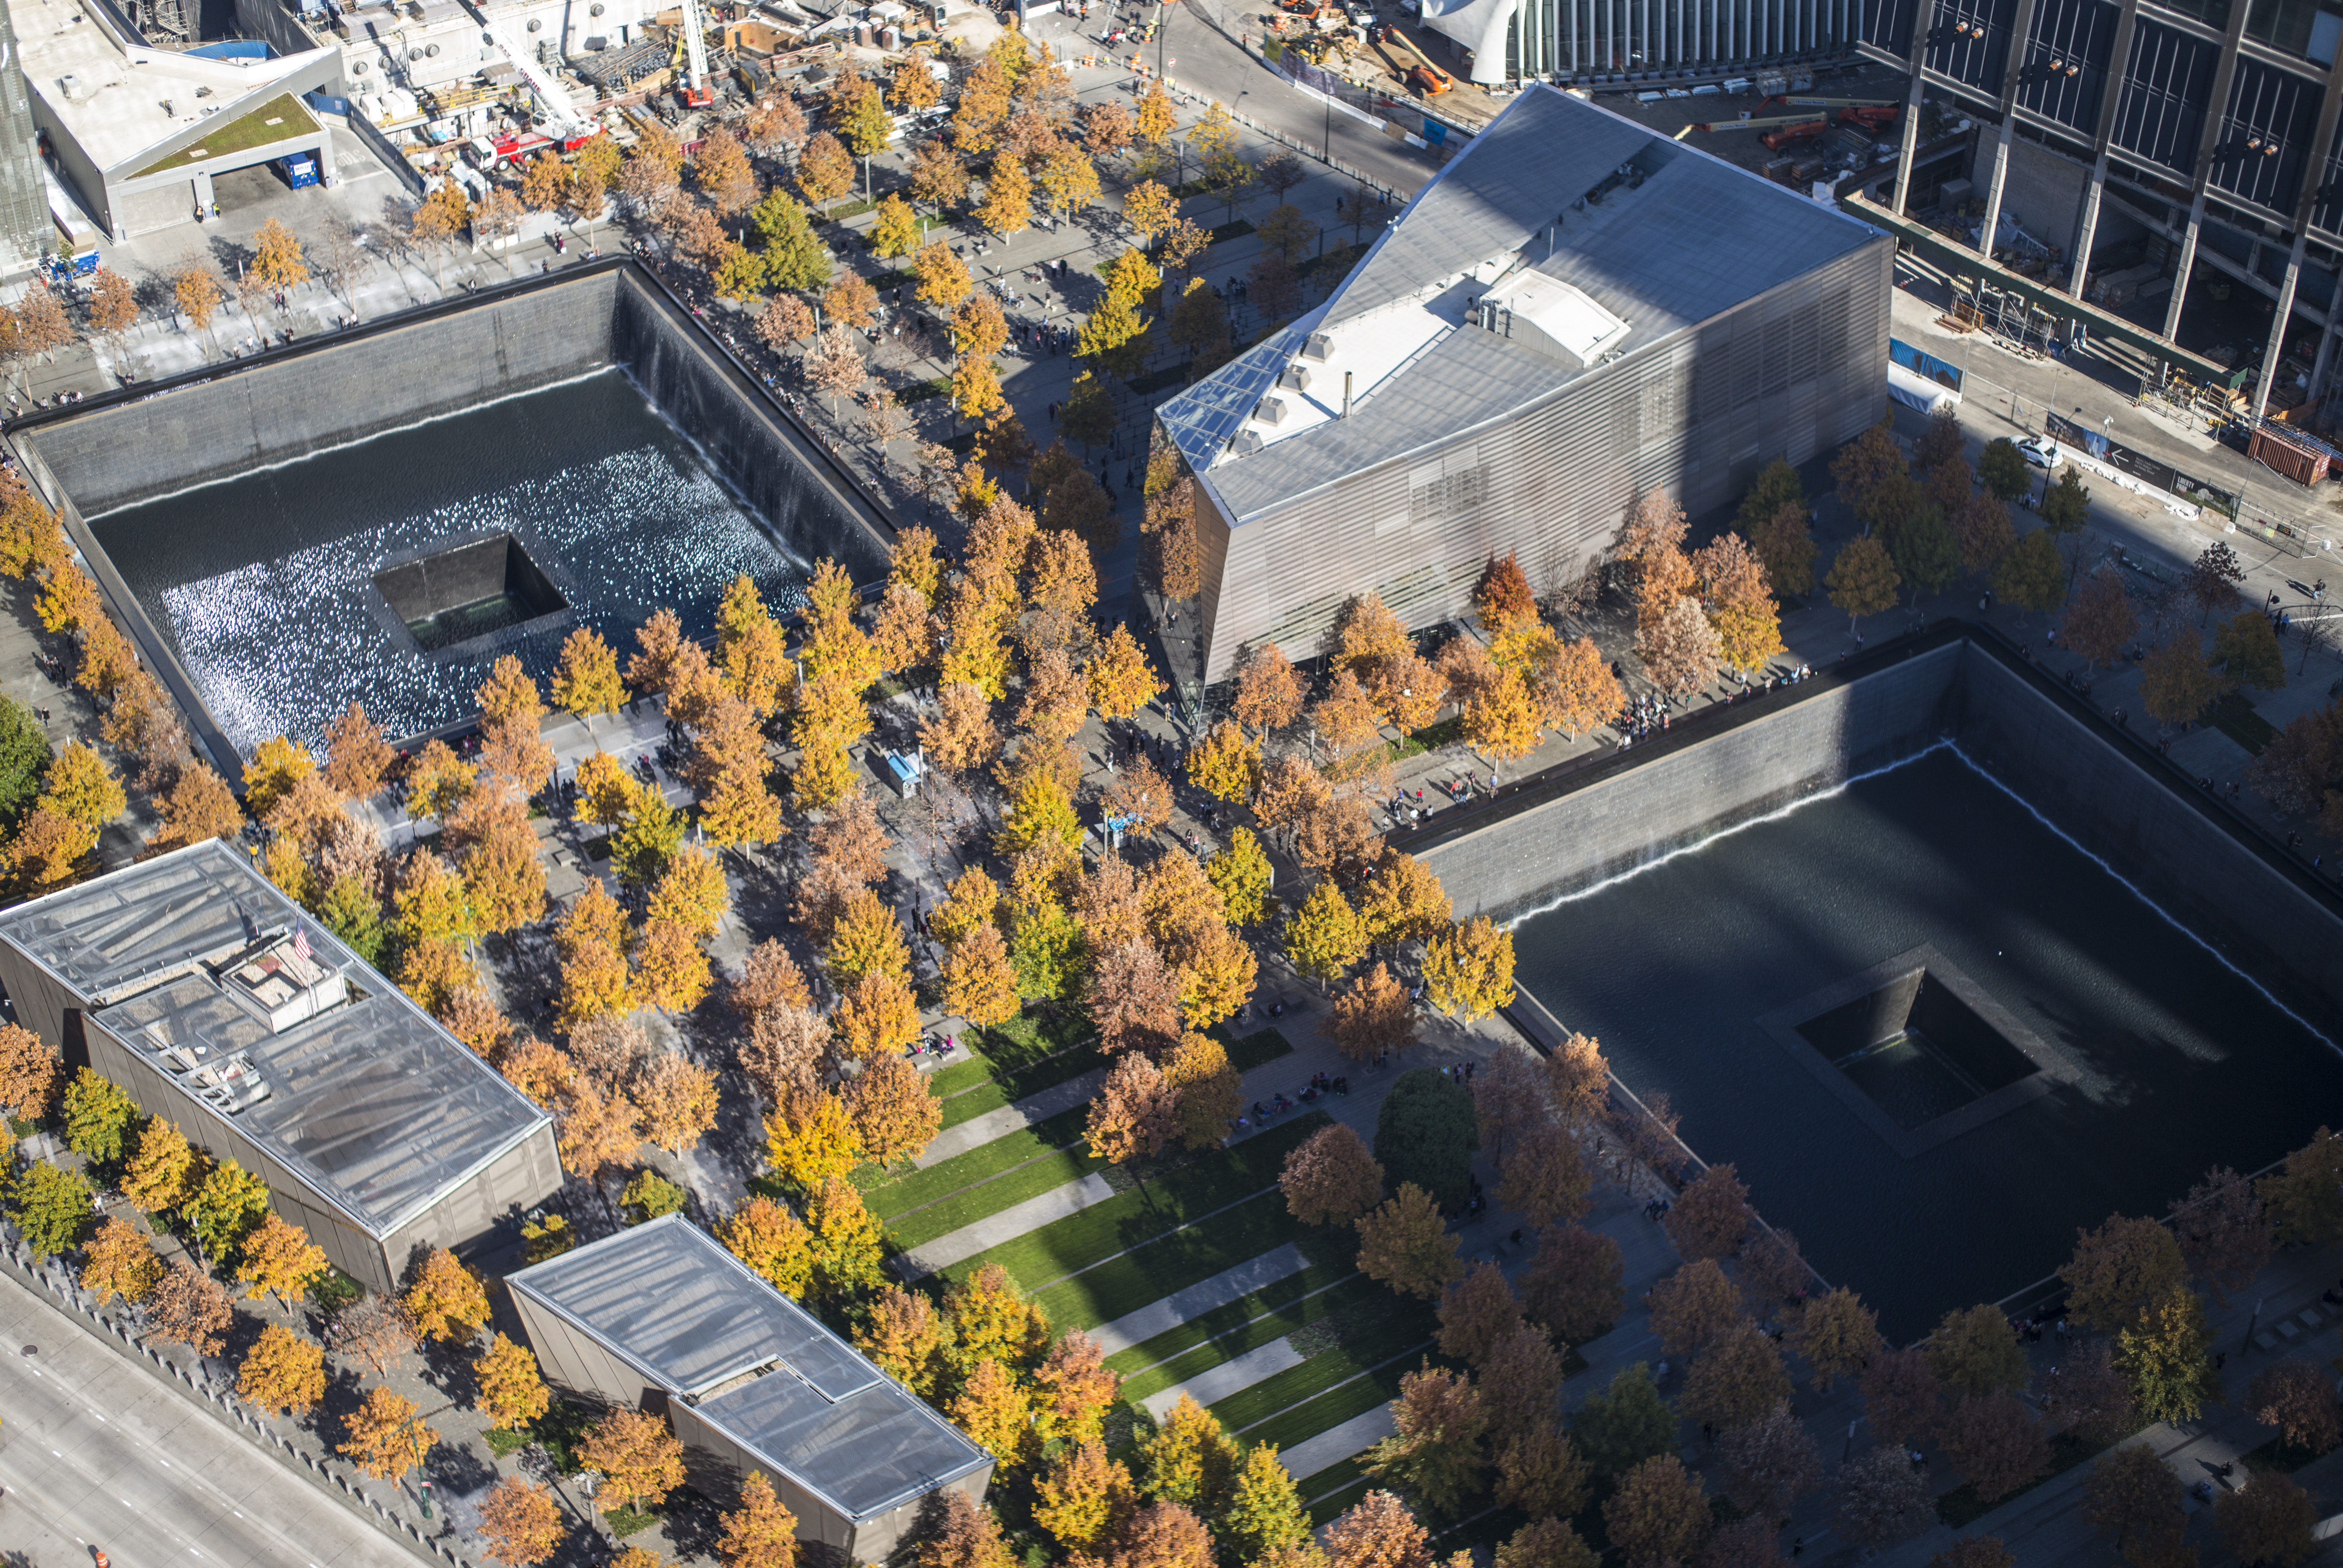 An aerial photo of the 9/11 Memorial on a fall day shows the colorful yellow and orange leaves on trees planted throughout the plaza. Shadows and sunlight fall across the reflecting pools and buildings of the Memorial.